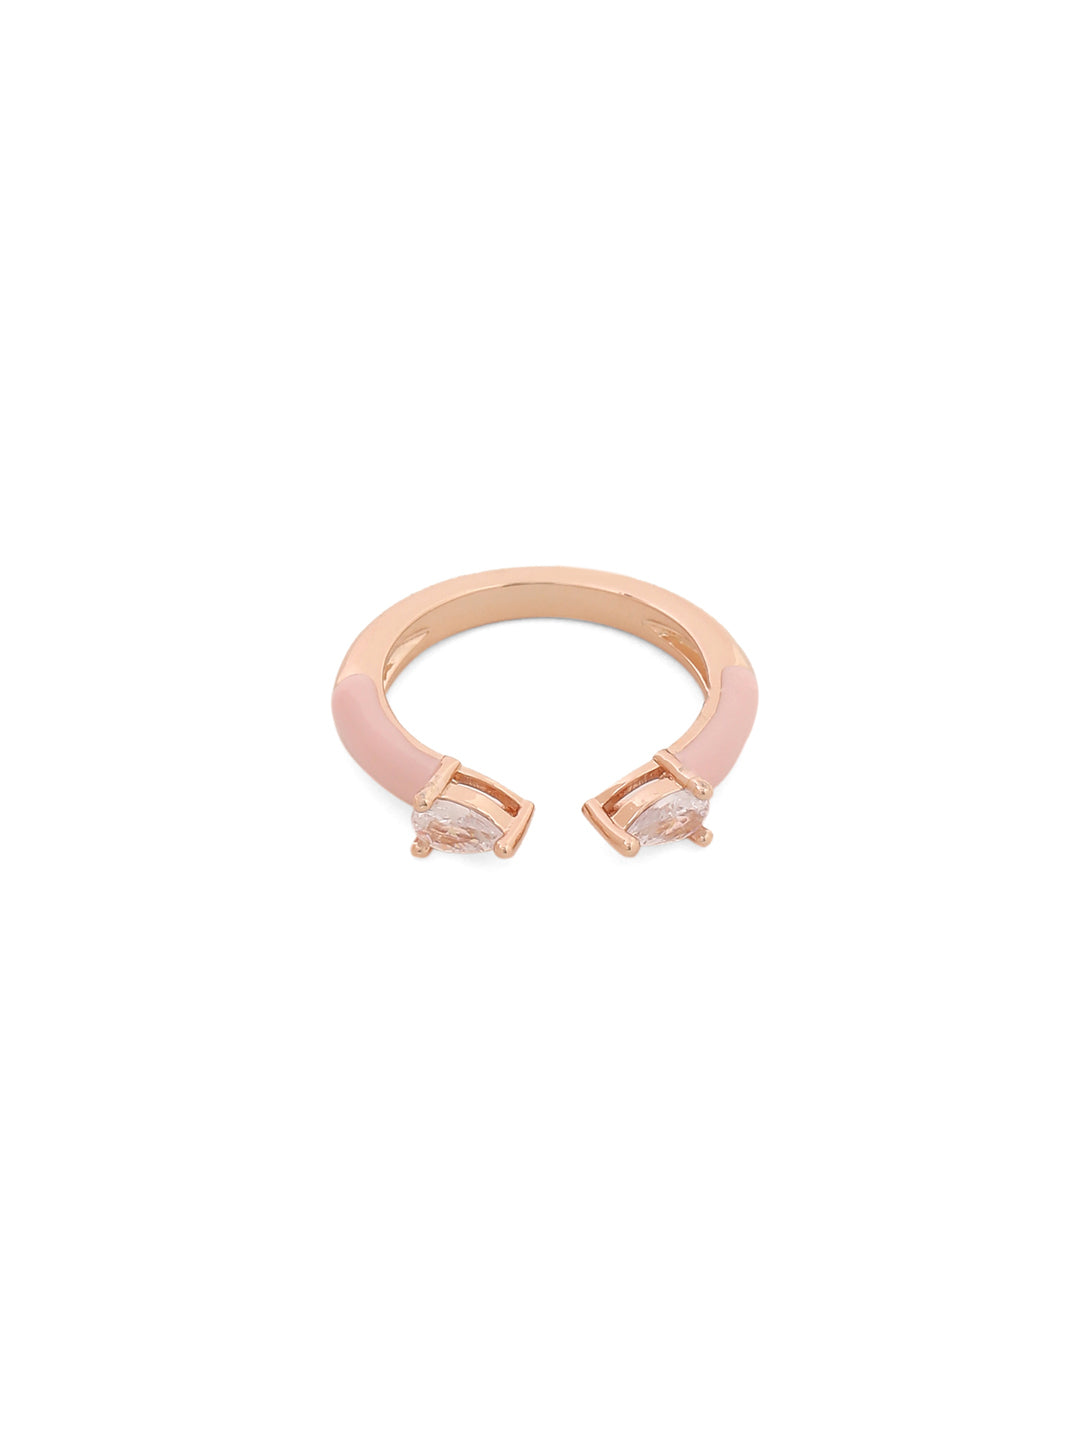 Gumball Ring - Pink